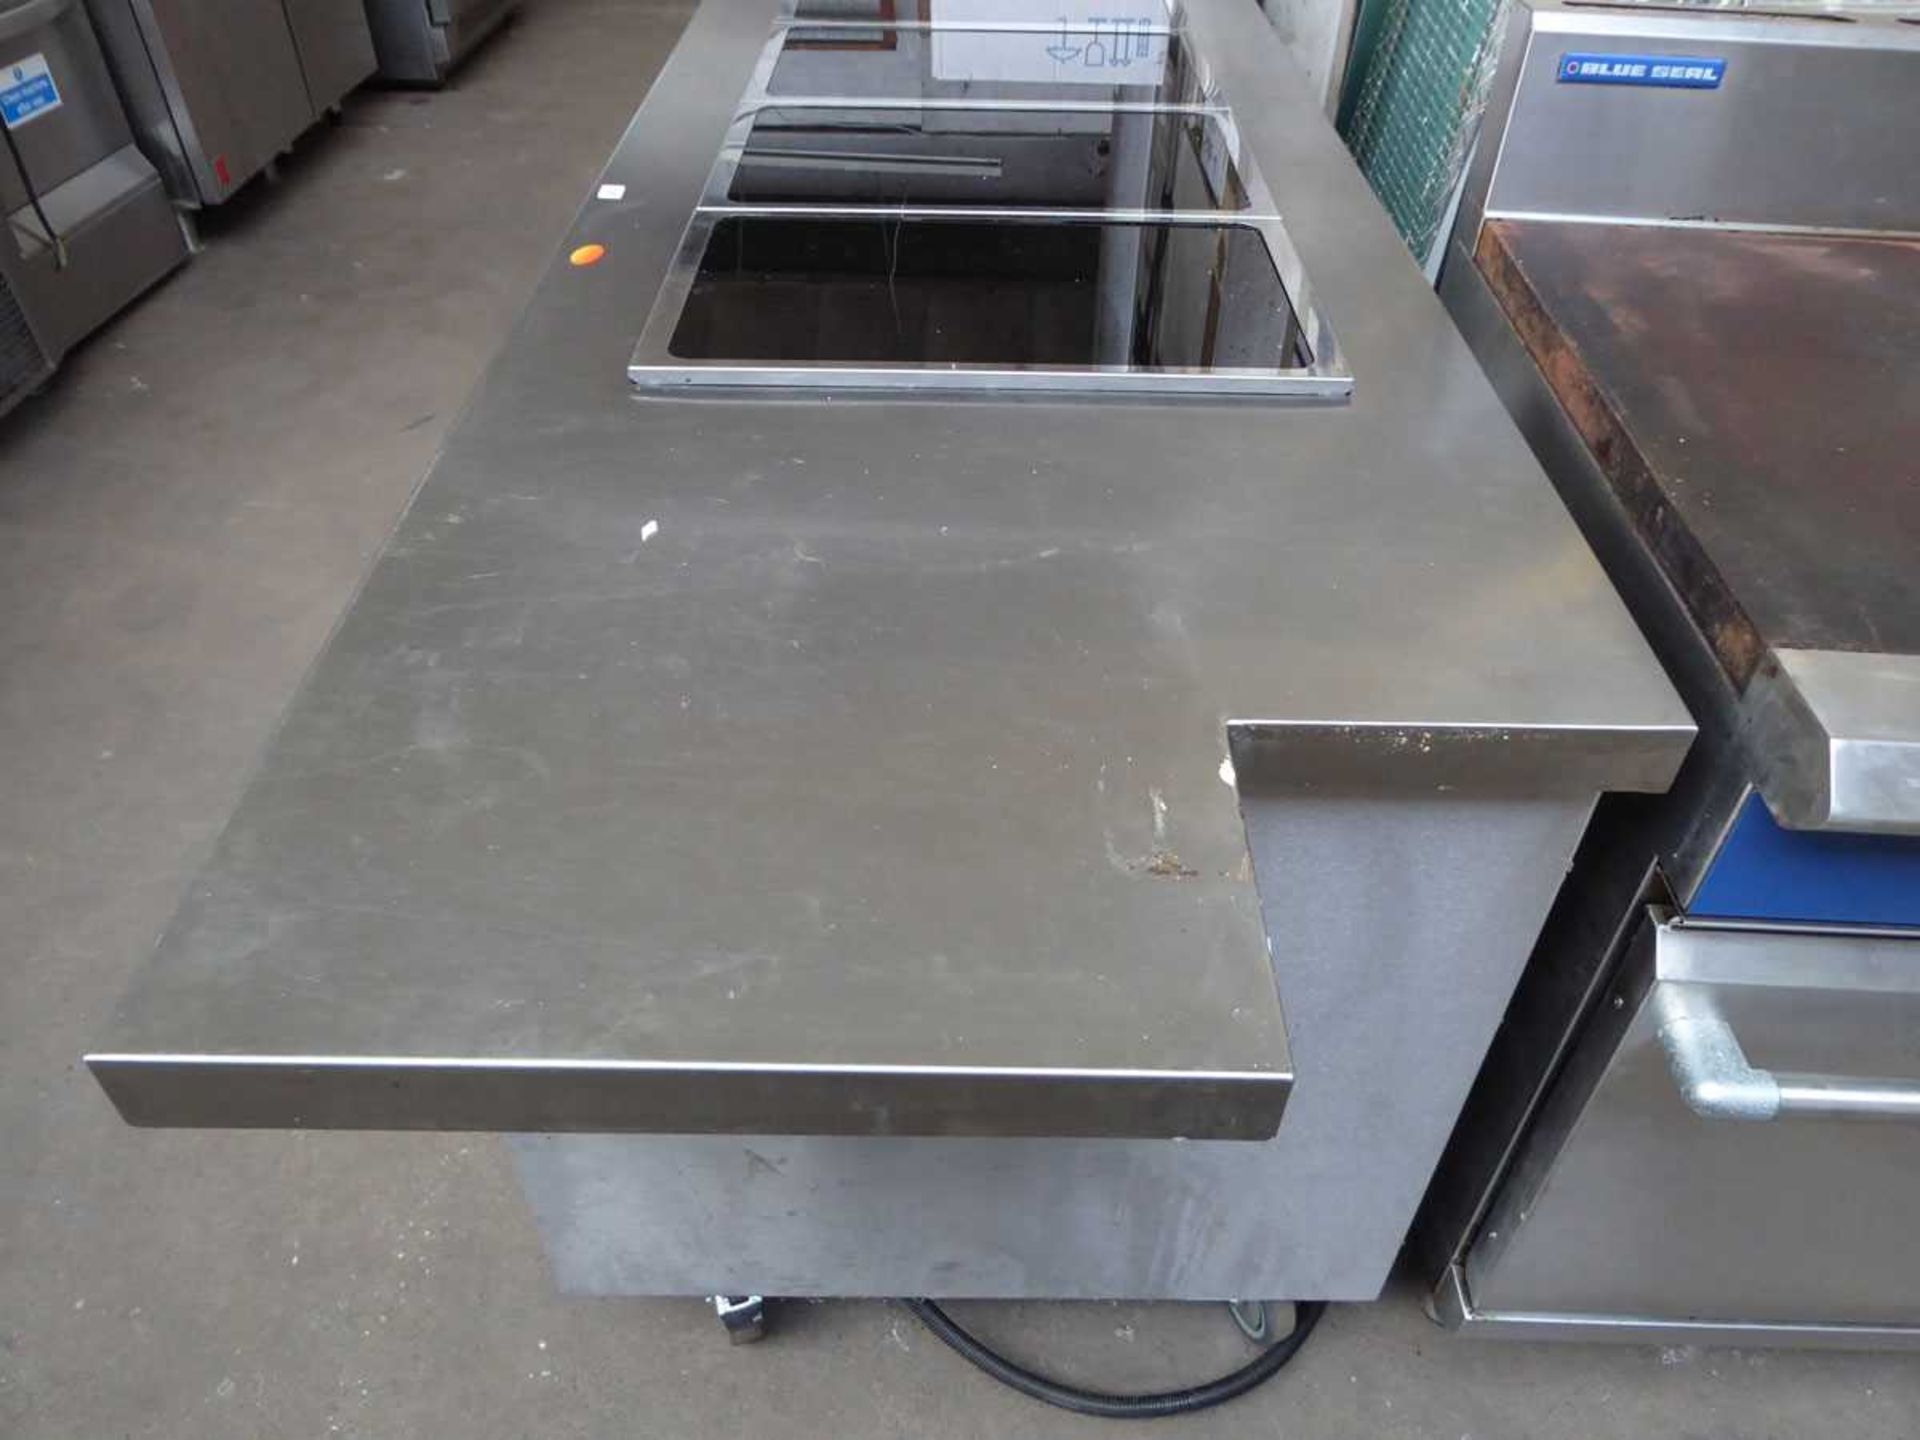 200cm electric mobile heated servery unit with 4 ceramic plate and large sliding cupboard under - Image 3 of 3